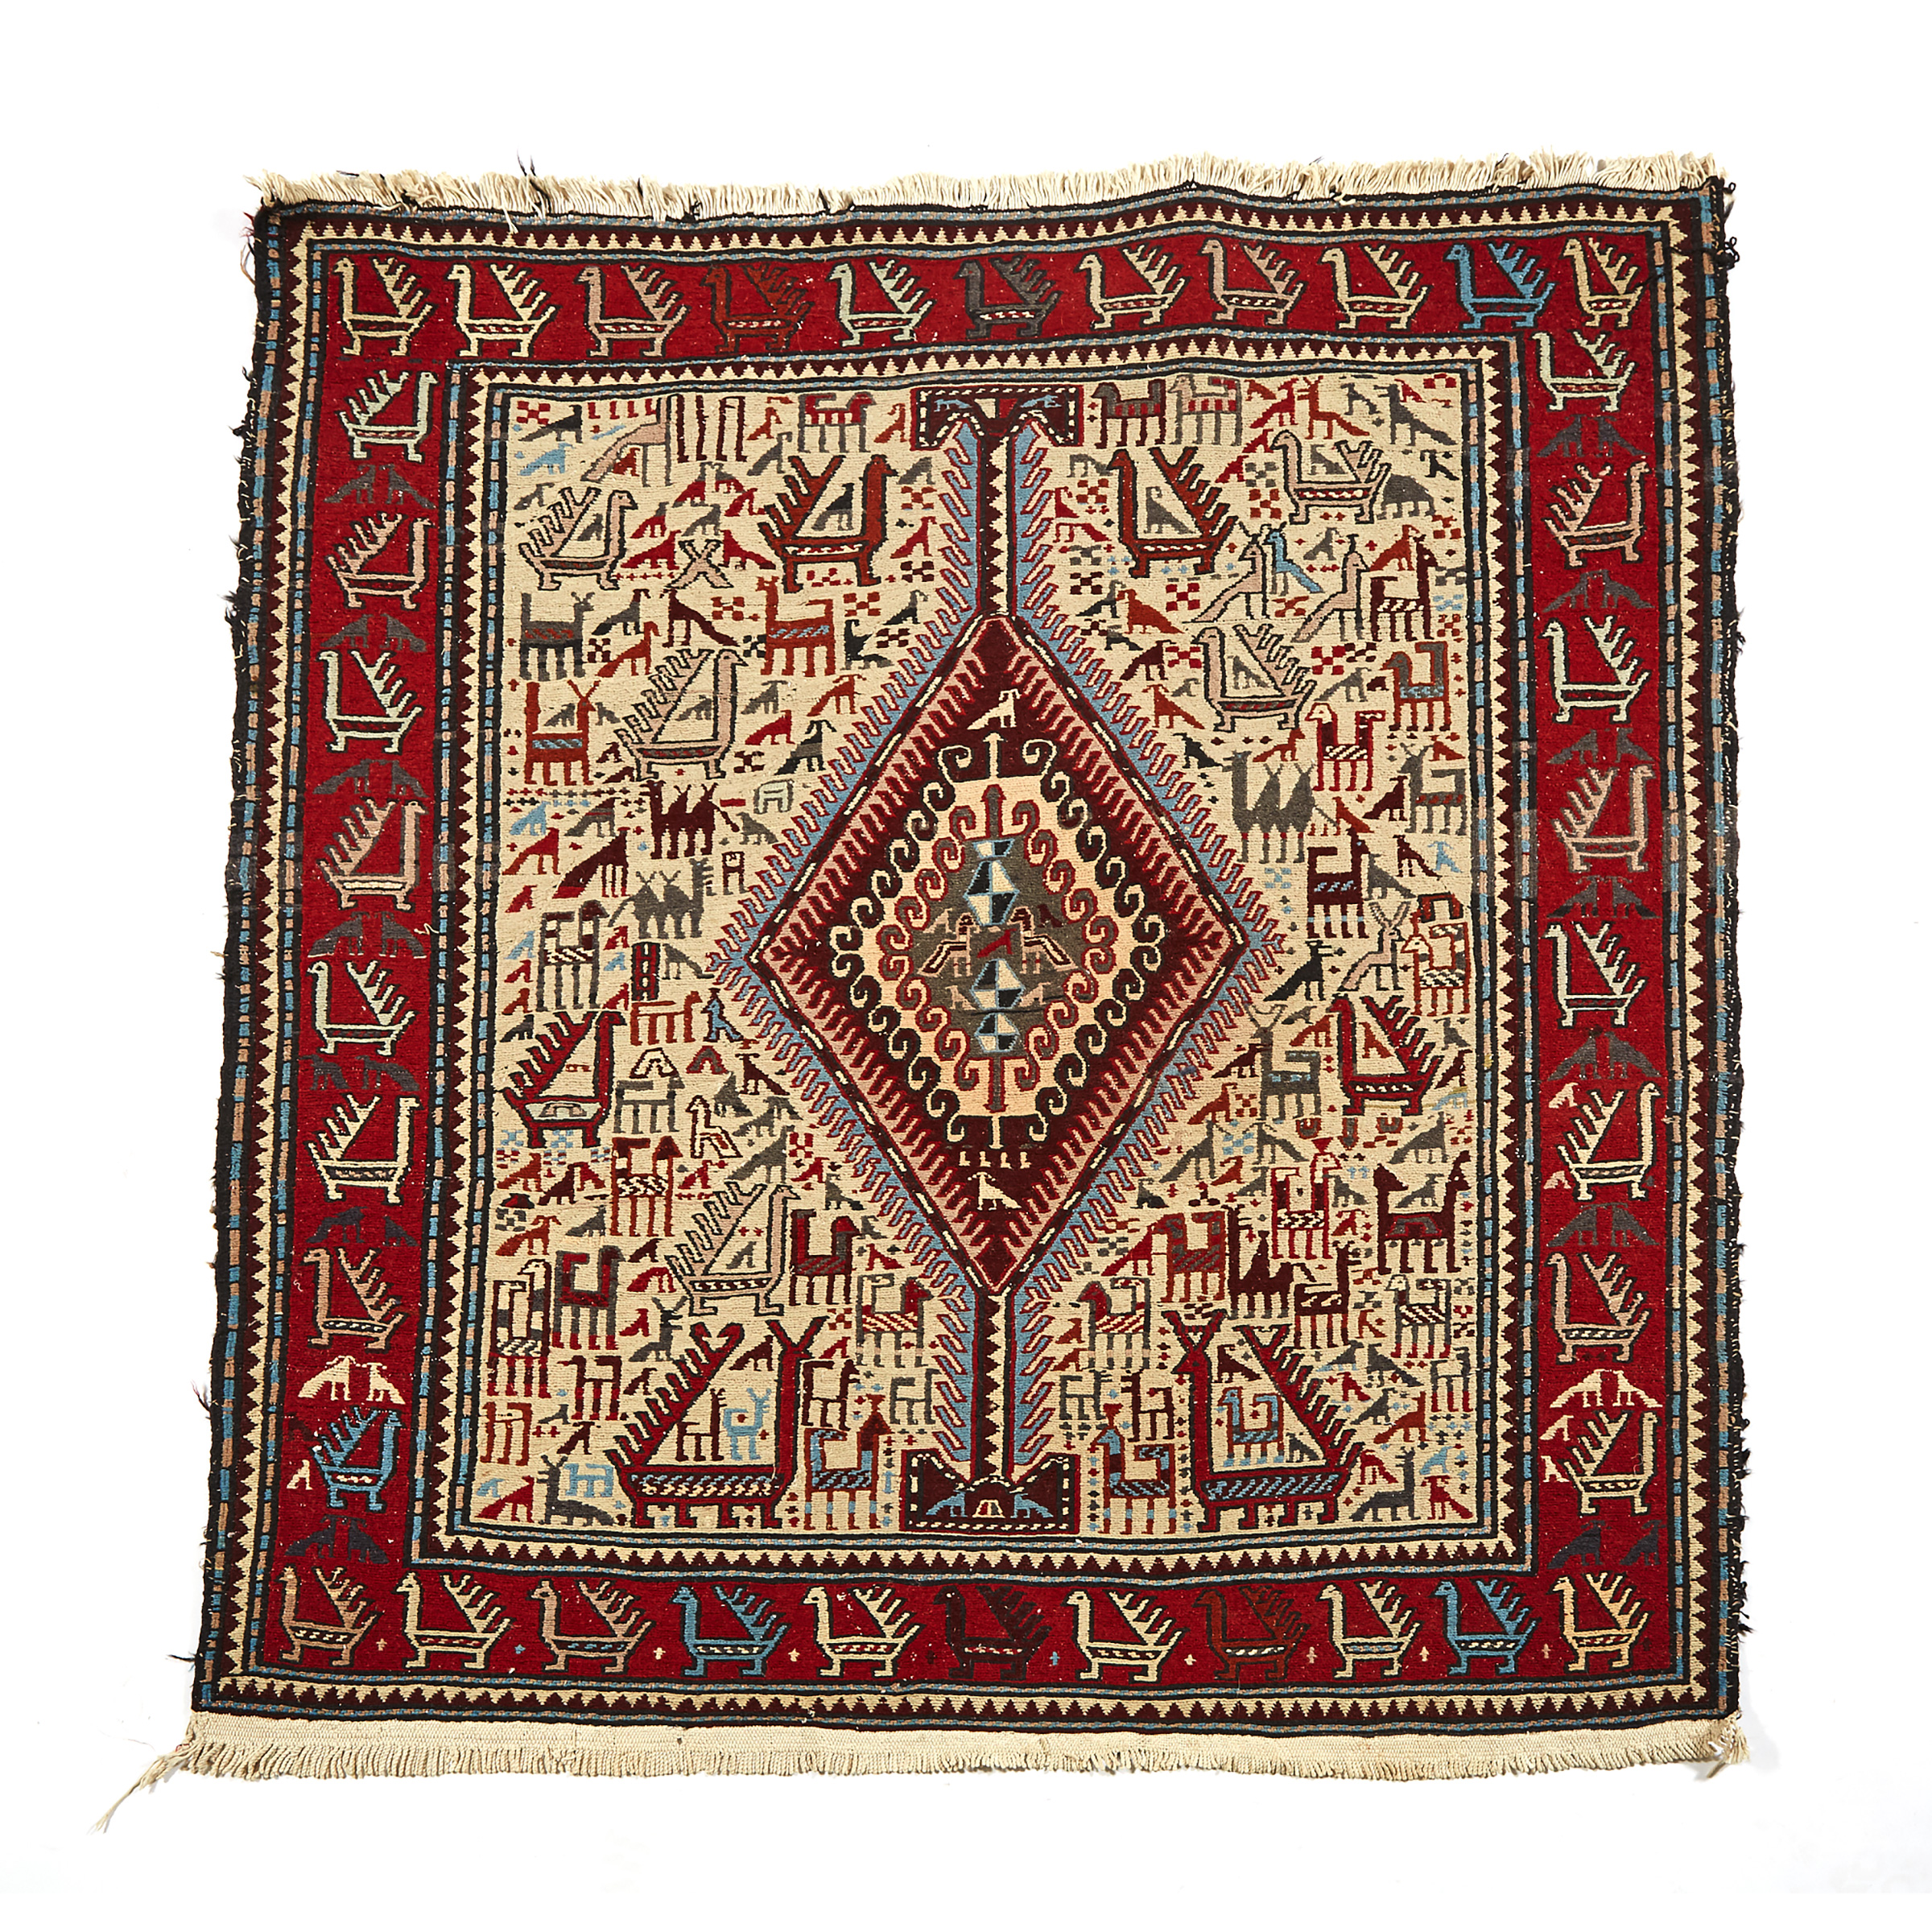 Soumak Rug, early to mid 20th century